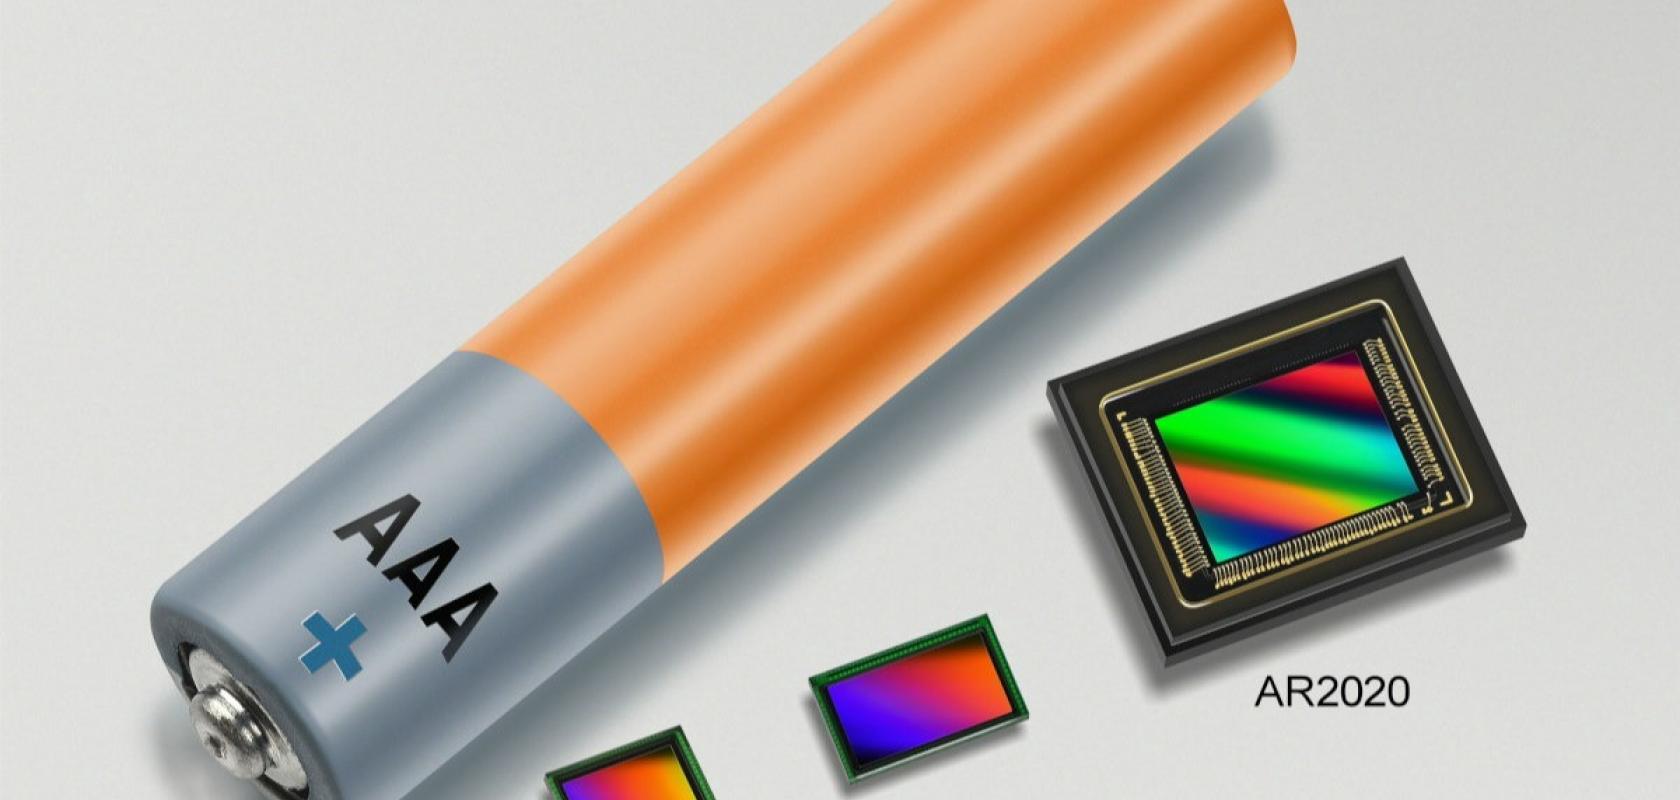 onsemi's new Hyperlux LP is equipped with 1.4µm pixels, aim to deliver exceptional image quality and energy efficiency (Image: onsemi)